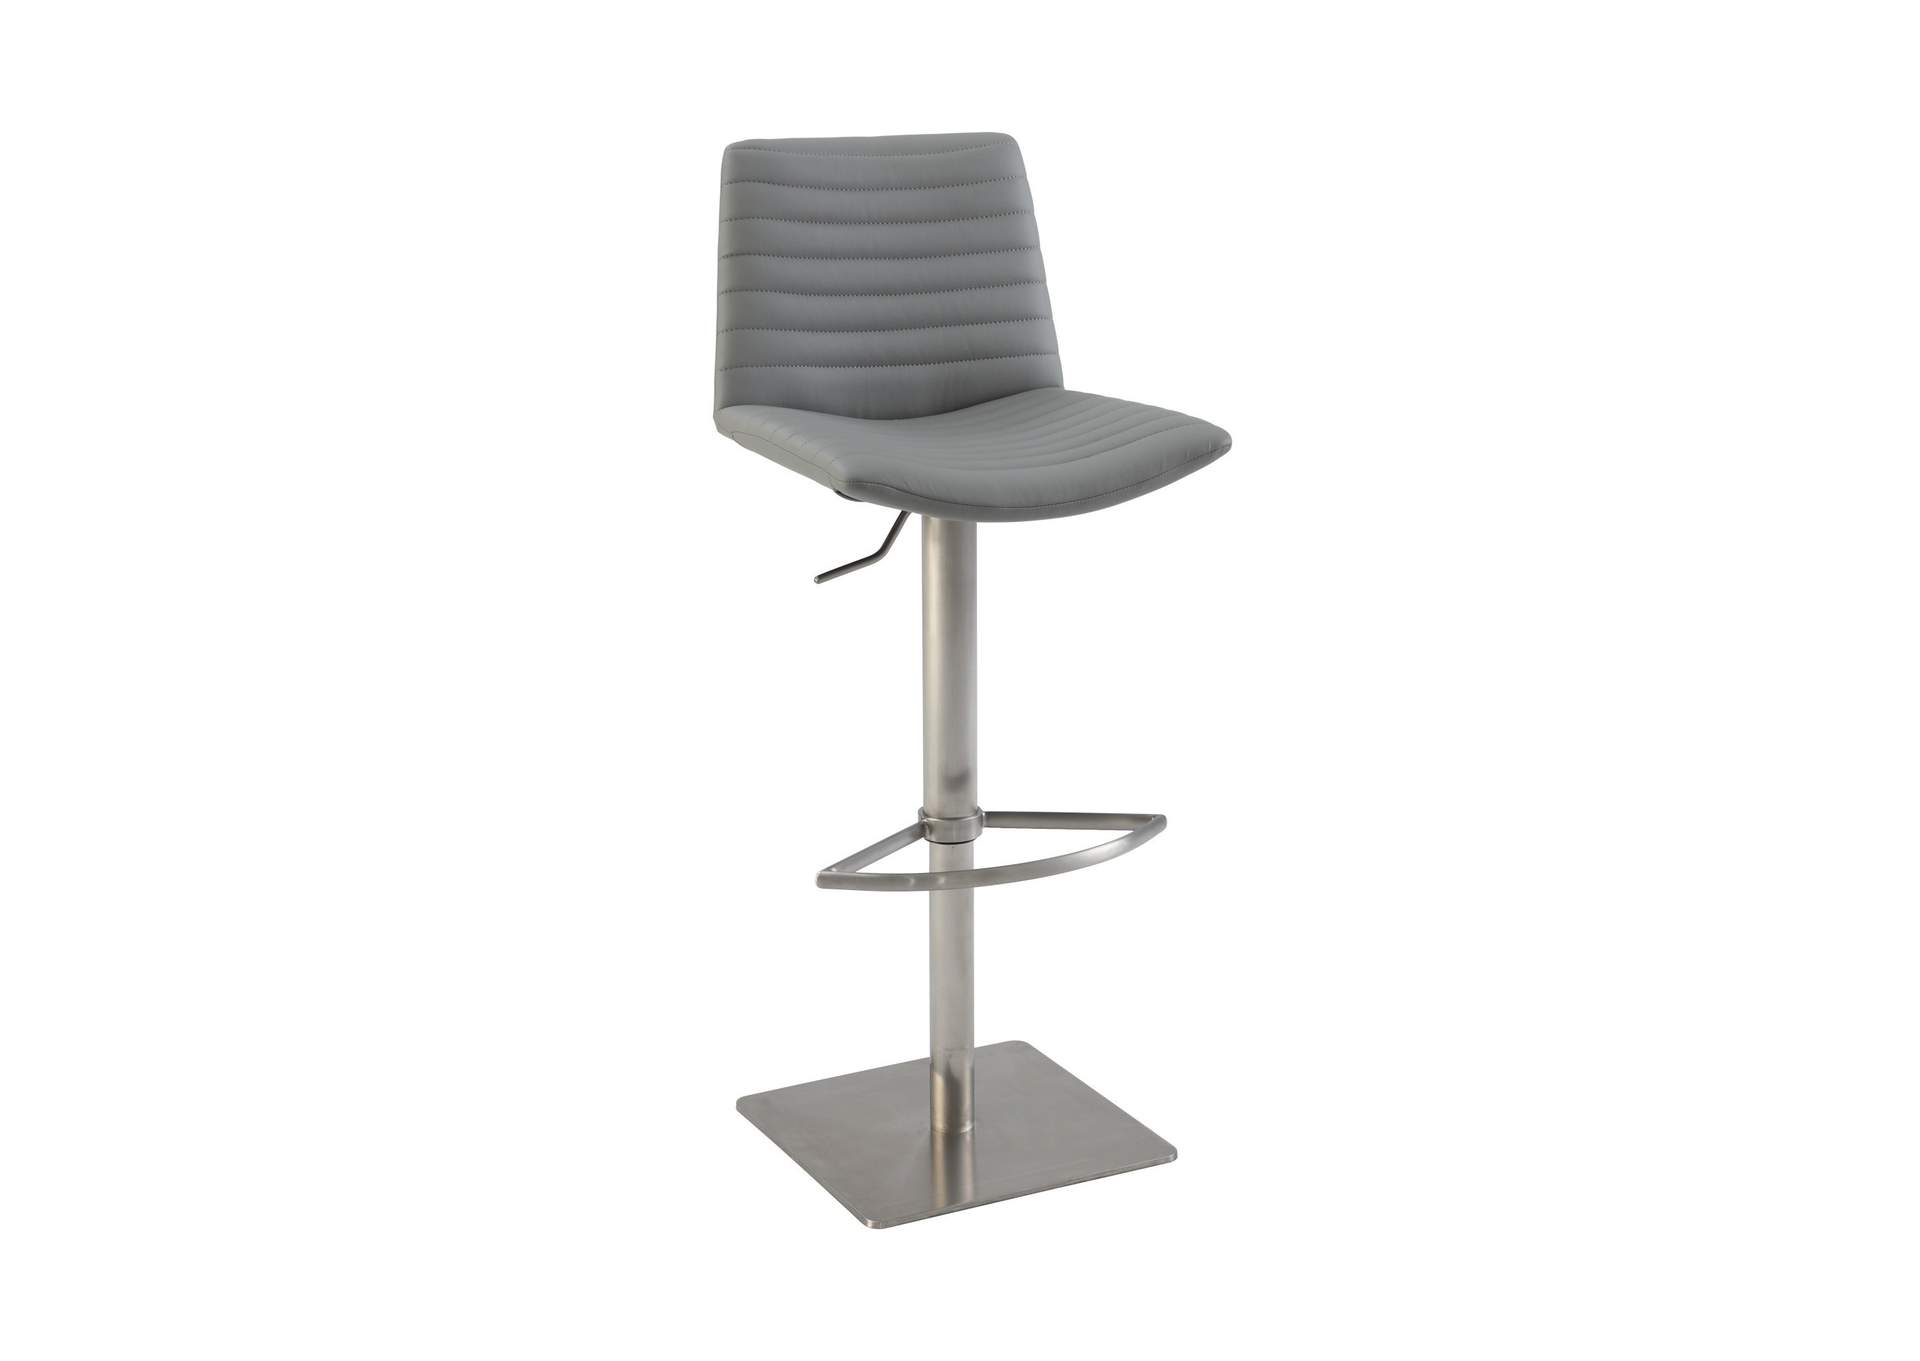 Ribbed Back And Seat Pneumatic-Adjustable Stool,Chintaly Imports